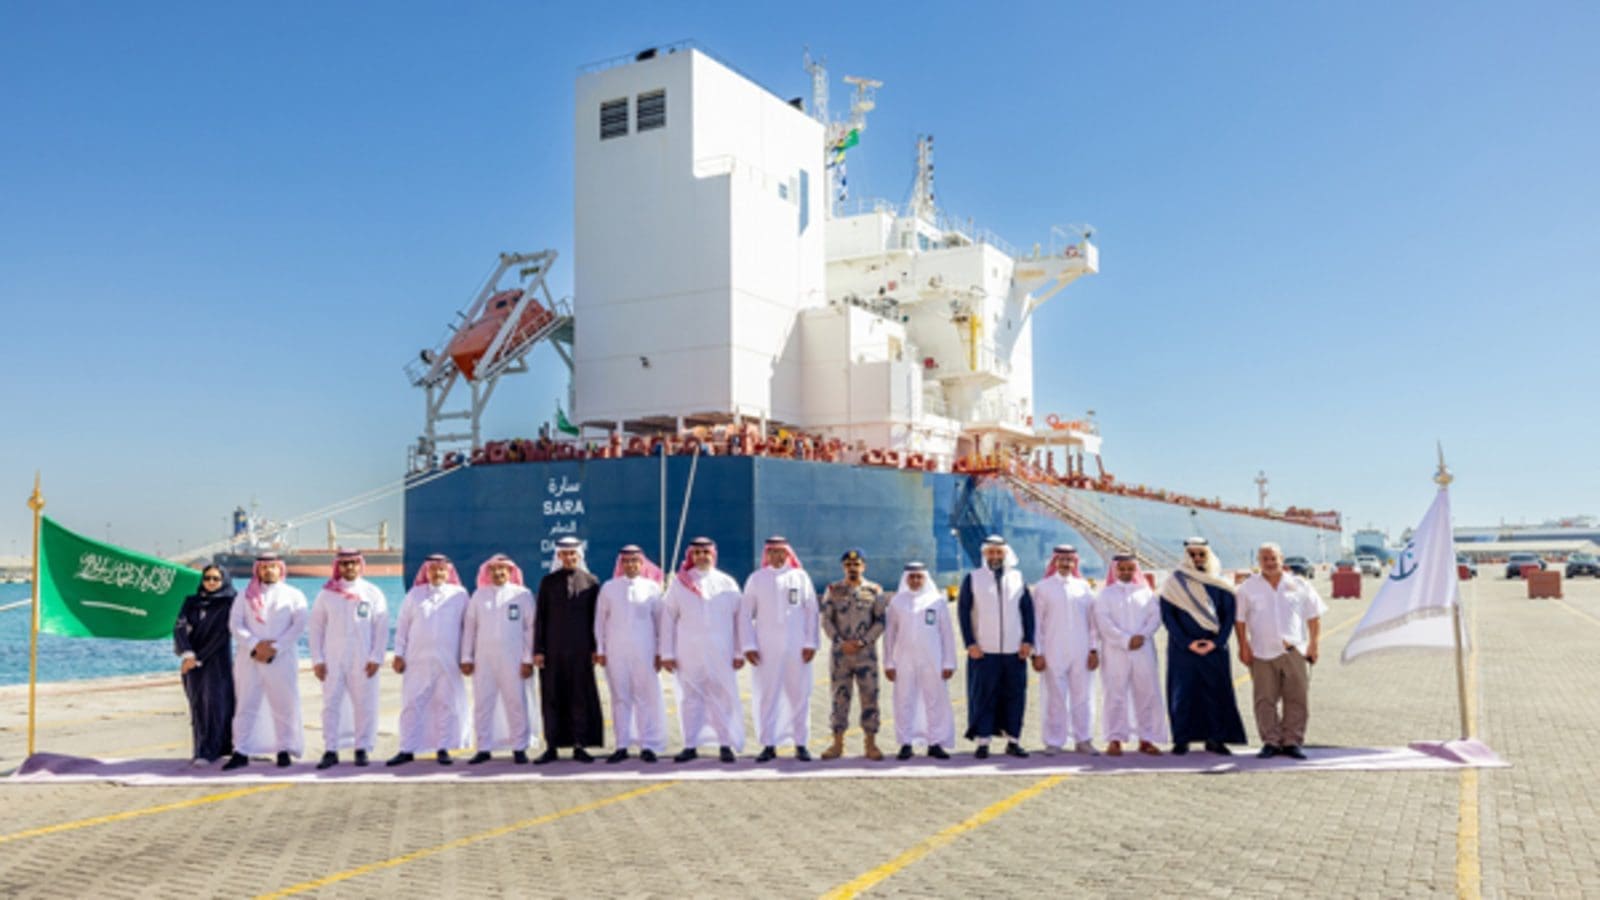 Saudi Arabia’s national shipping carrier Bahri delivers 60,000 tonnes of barley from Australia